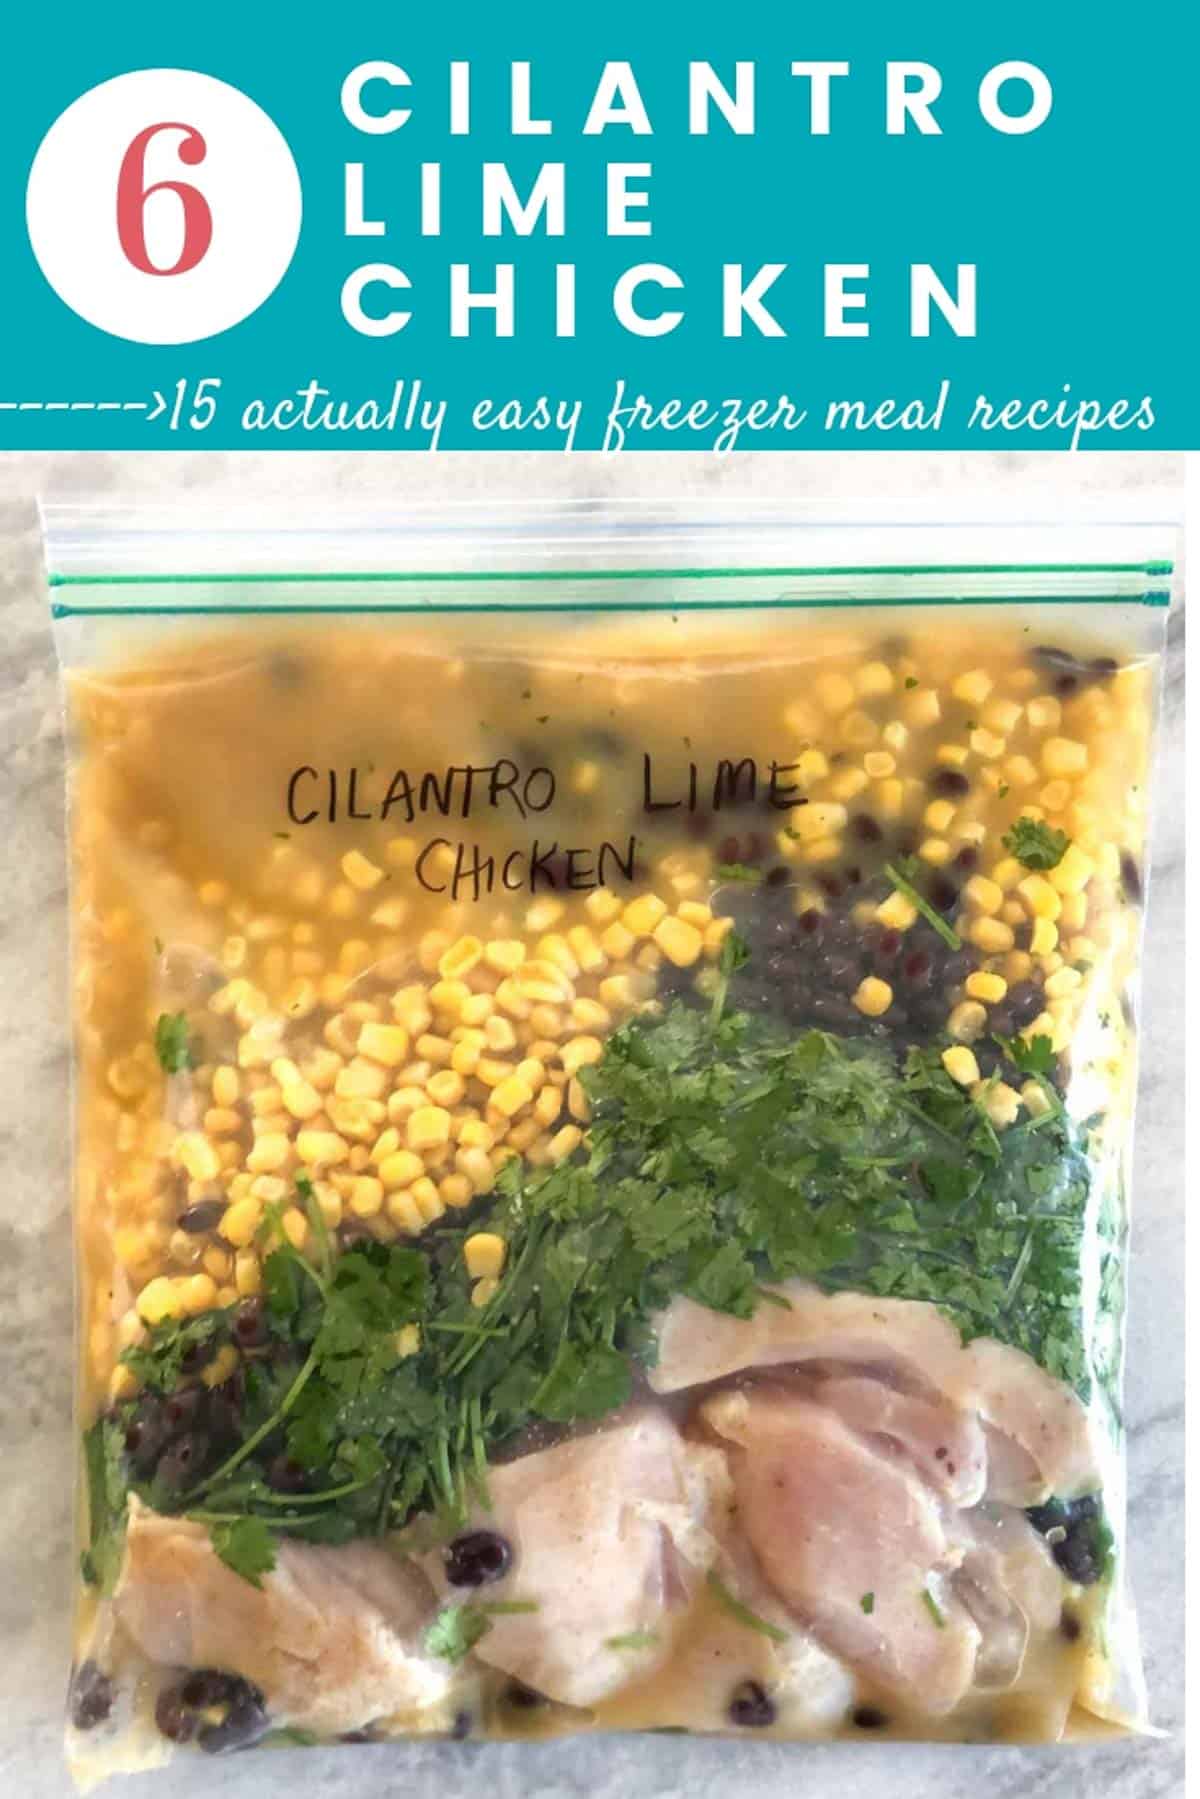 Cilantro Lime Chicken freezer meal prepped in bag